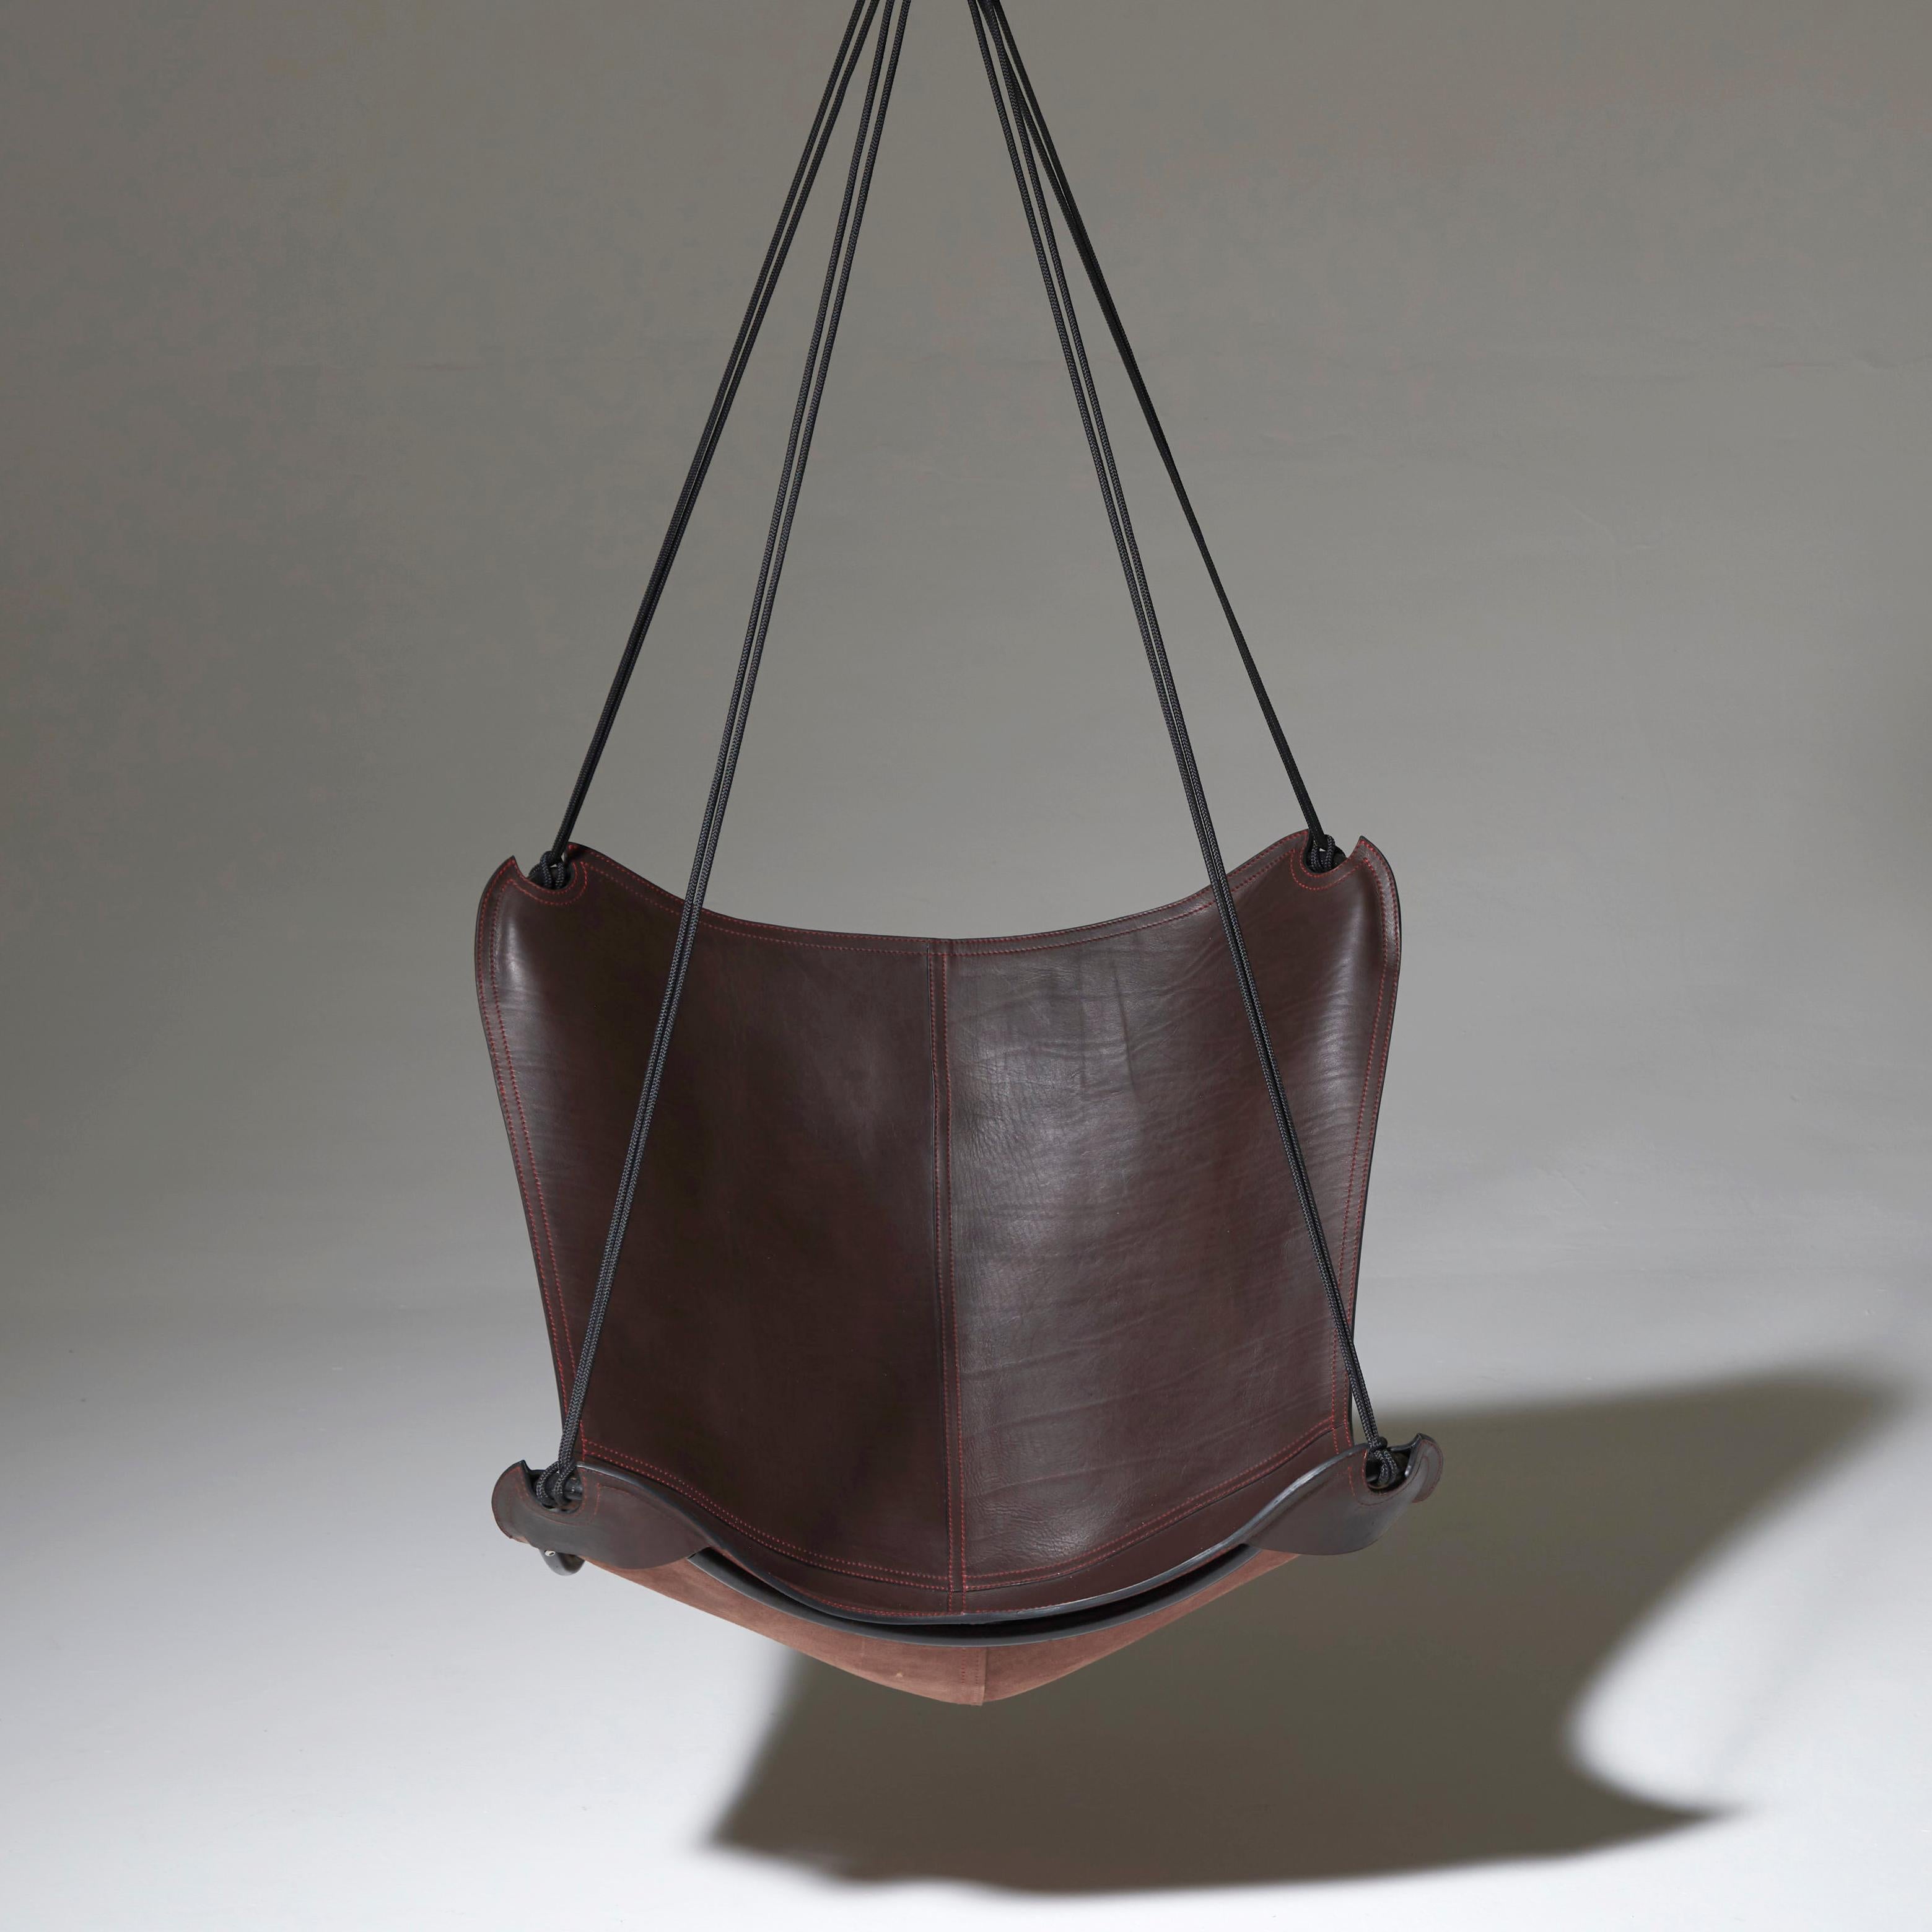 Rustic Modern Take on the Butterfly Chair - Now Hanging Chair For Sale